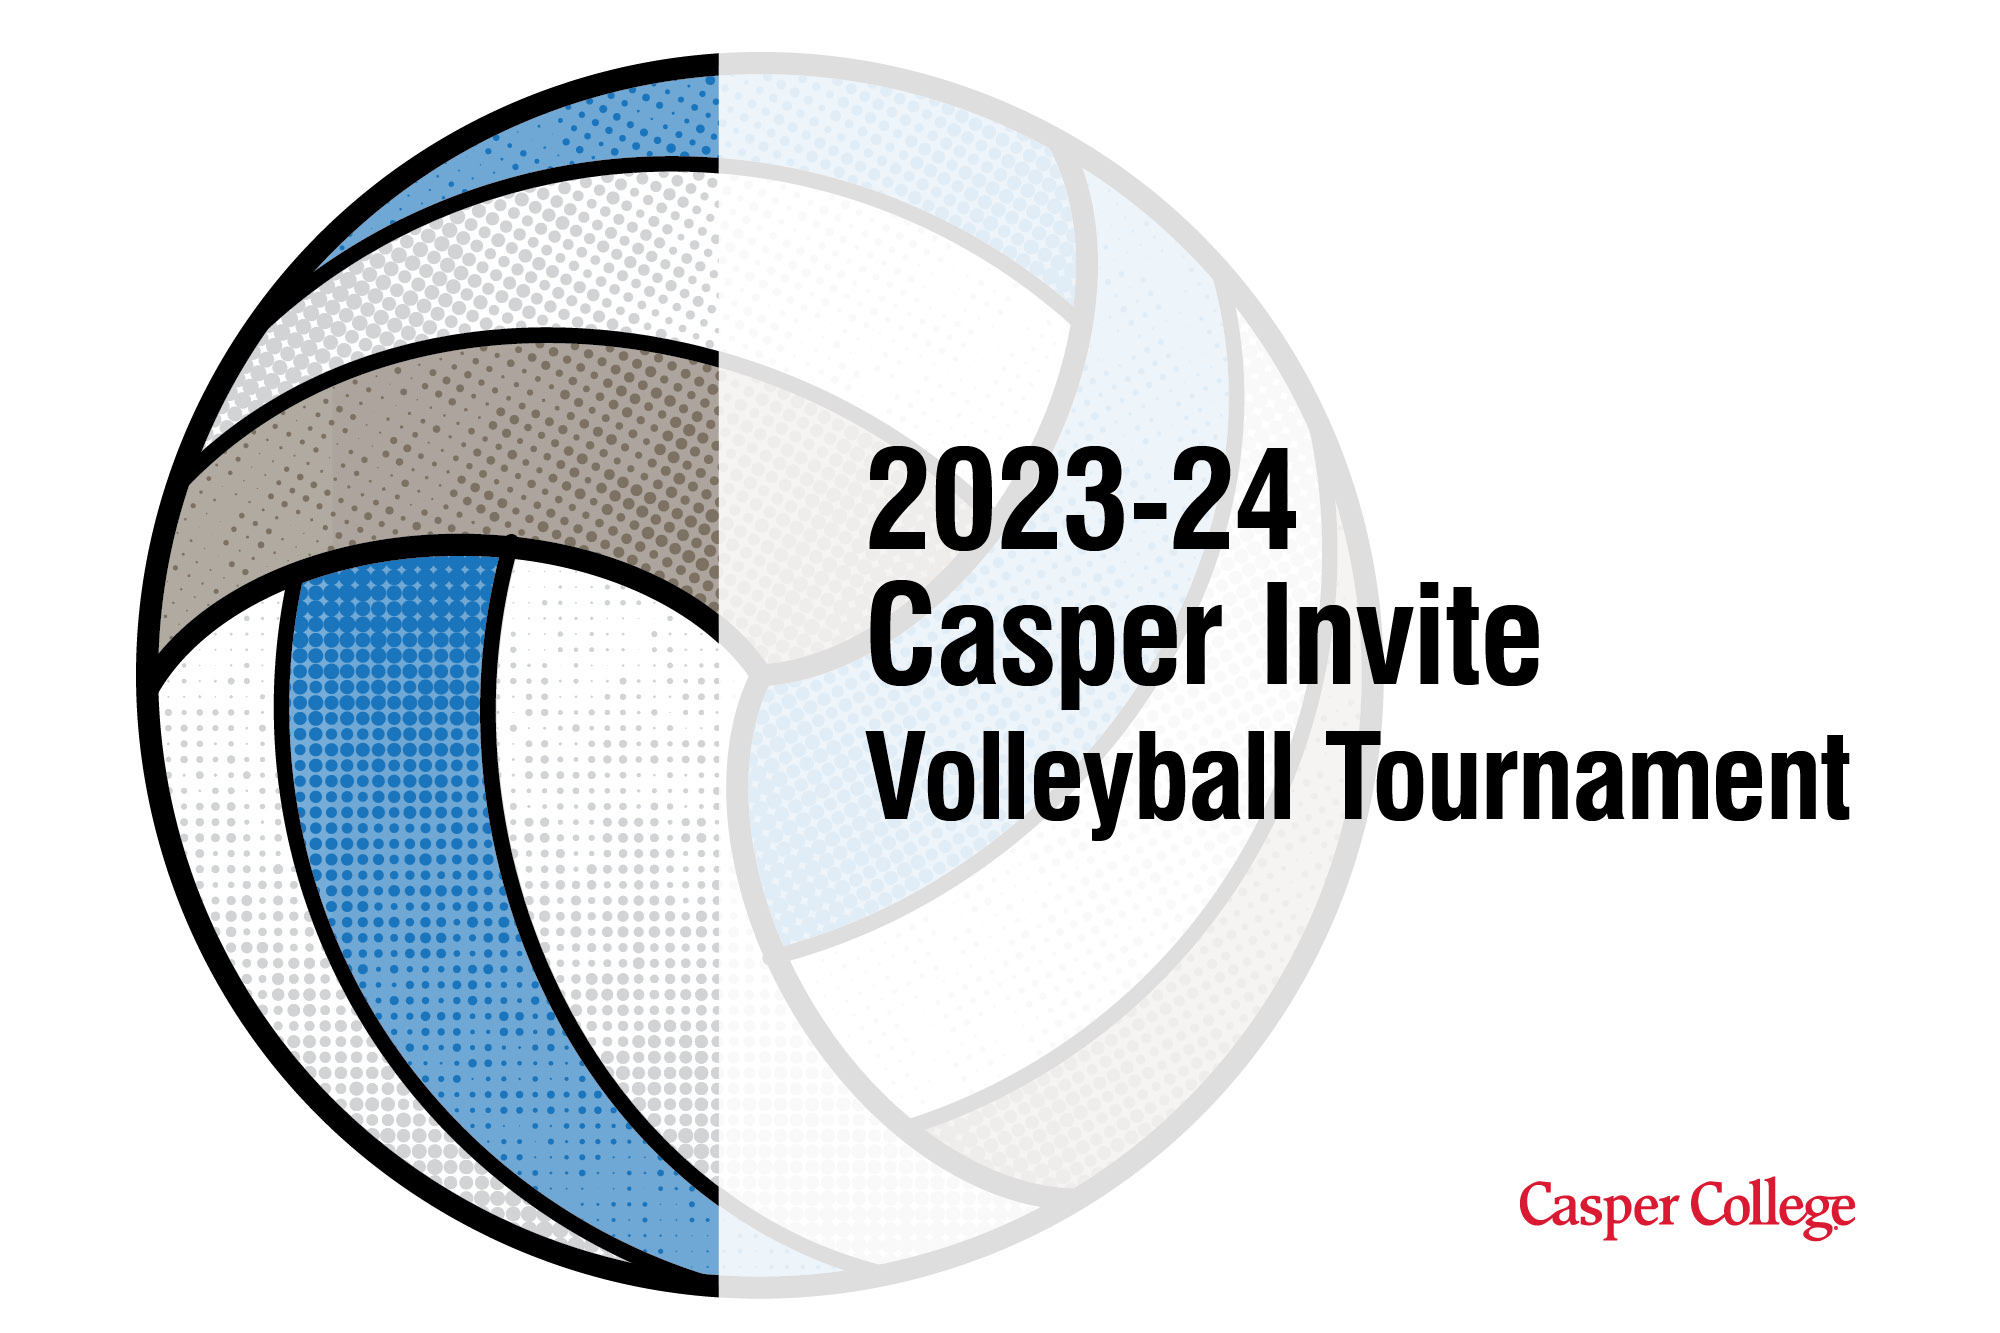 Image for volleyball tournament press release.